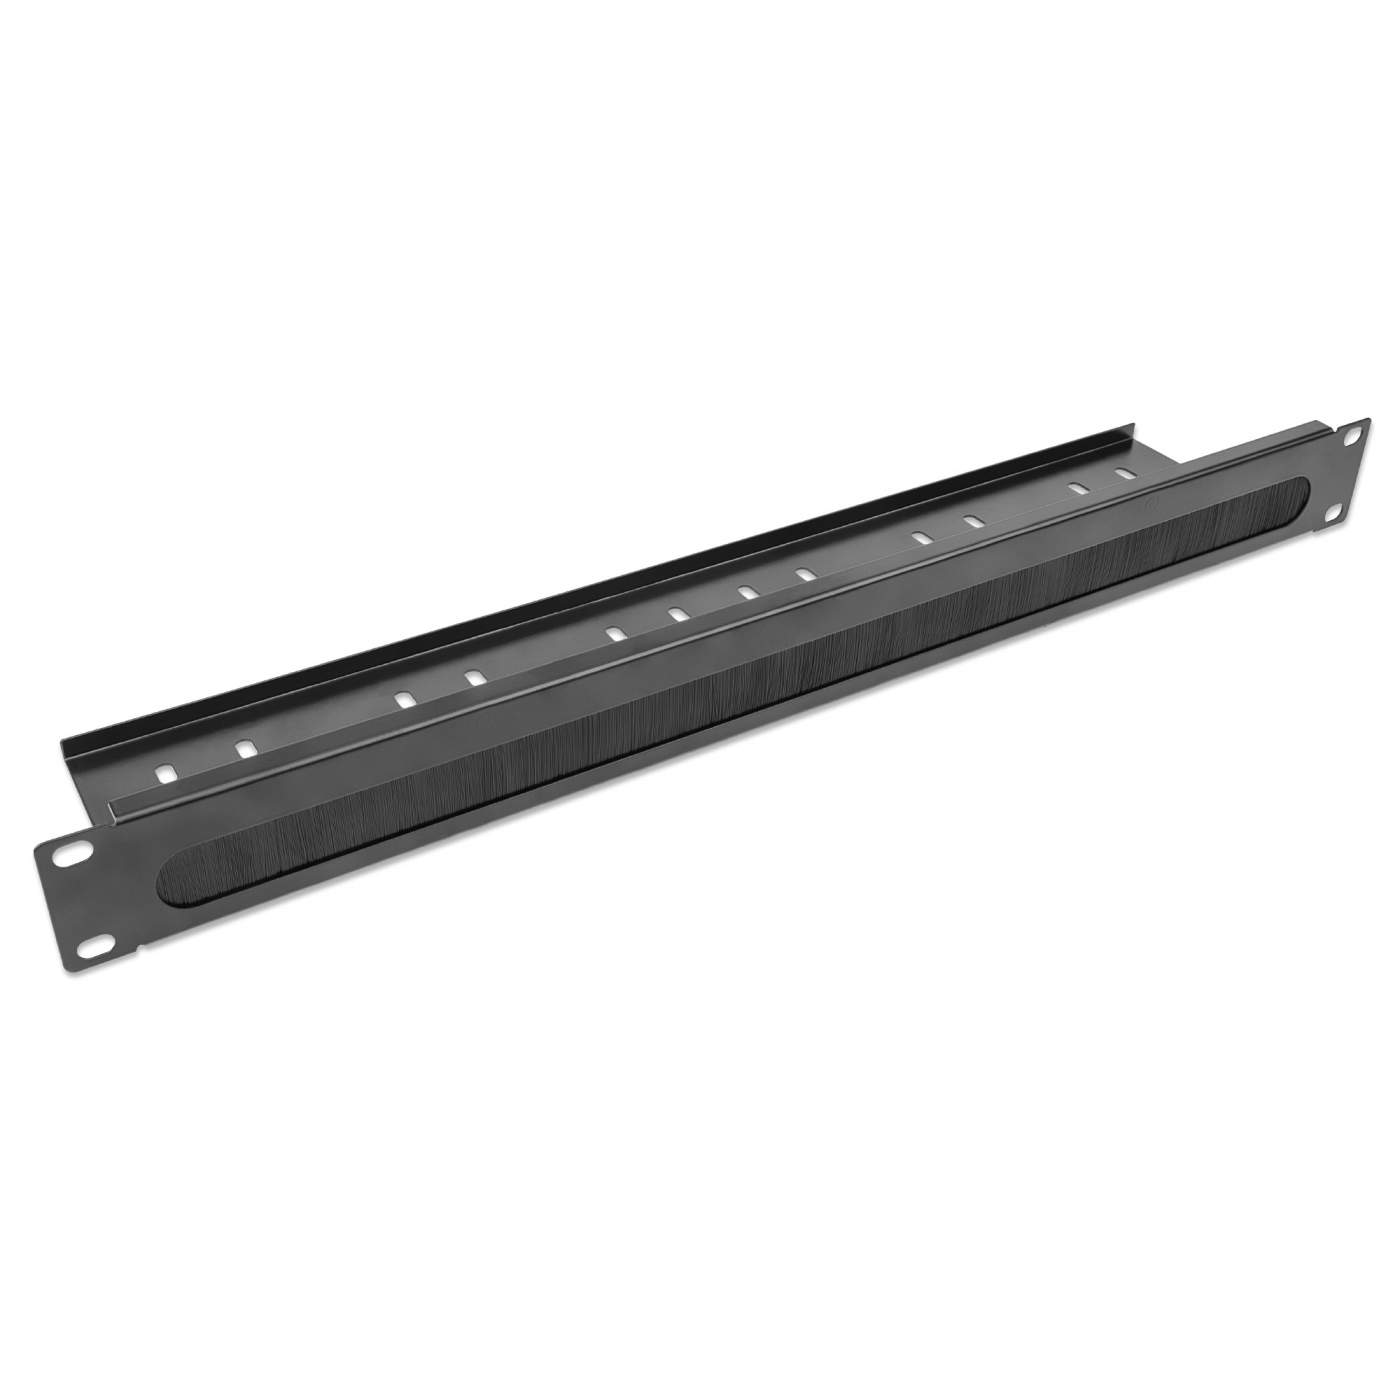 Intellinet 19 Cable Entry Panel with Cable Tray 2-Pack (715812) –  Intellinet Europe